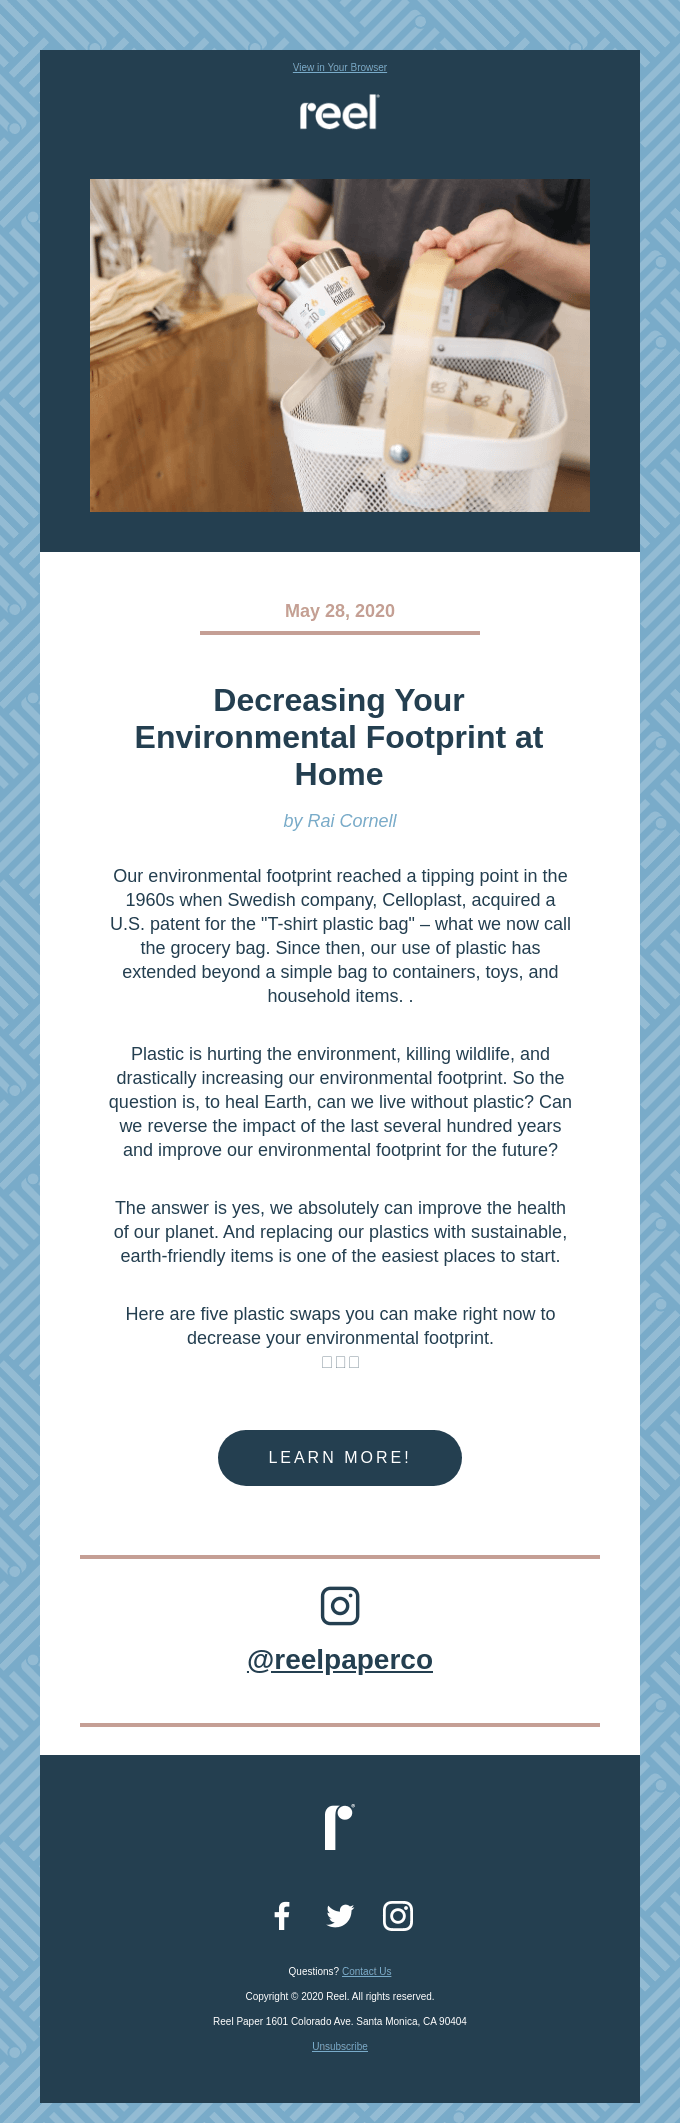 How to Decrease Your Environmental Footprint at Home...